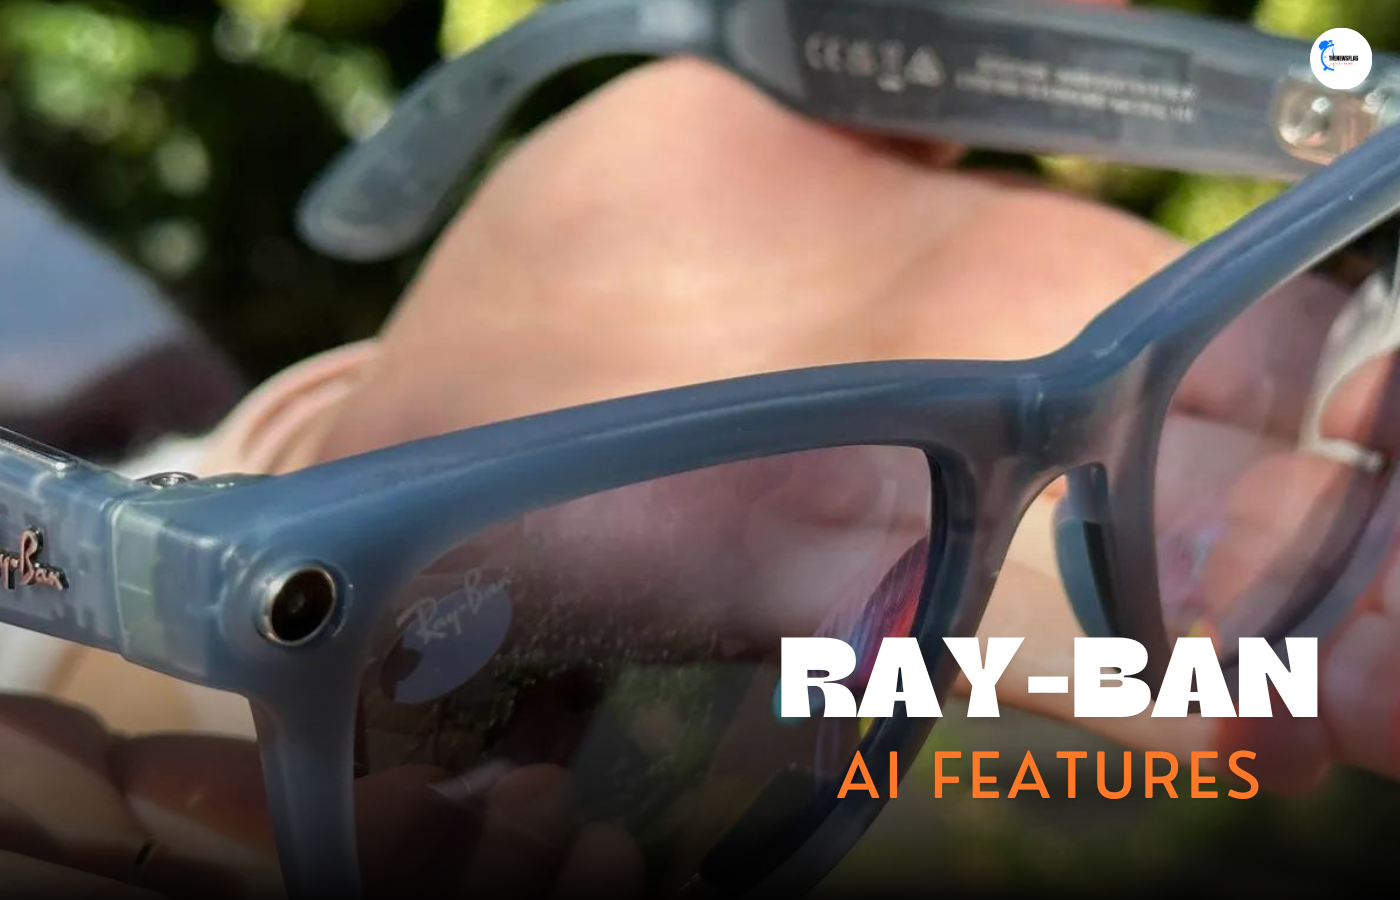 What do ray ban smart glasses do?